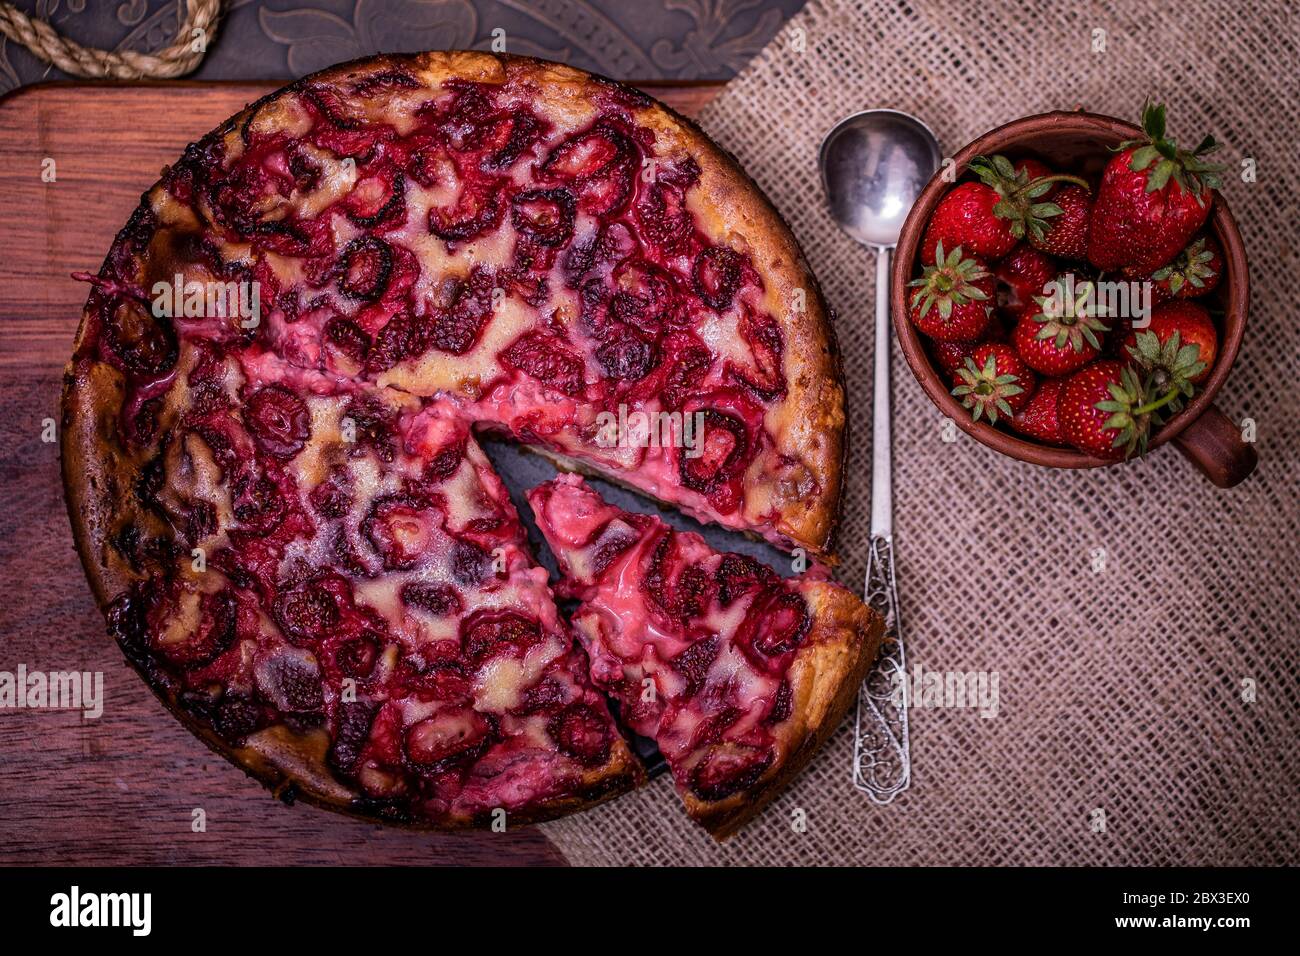 Traditional homemade strawberry cake dessert with fresh strawberry on vintage wooden background. Dark food photo, rustic style, natural light. Stock Photo